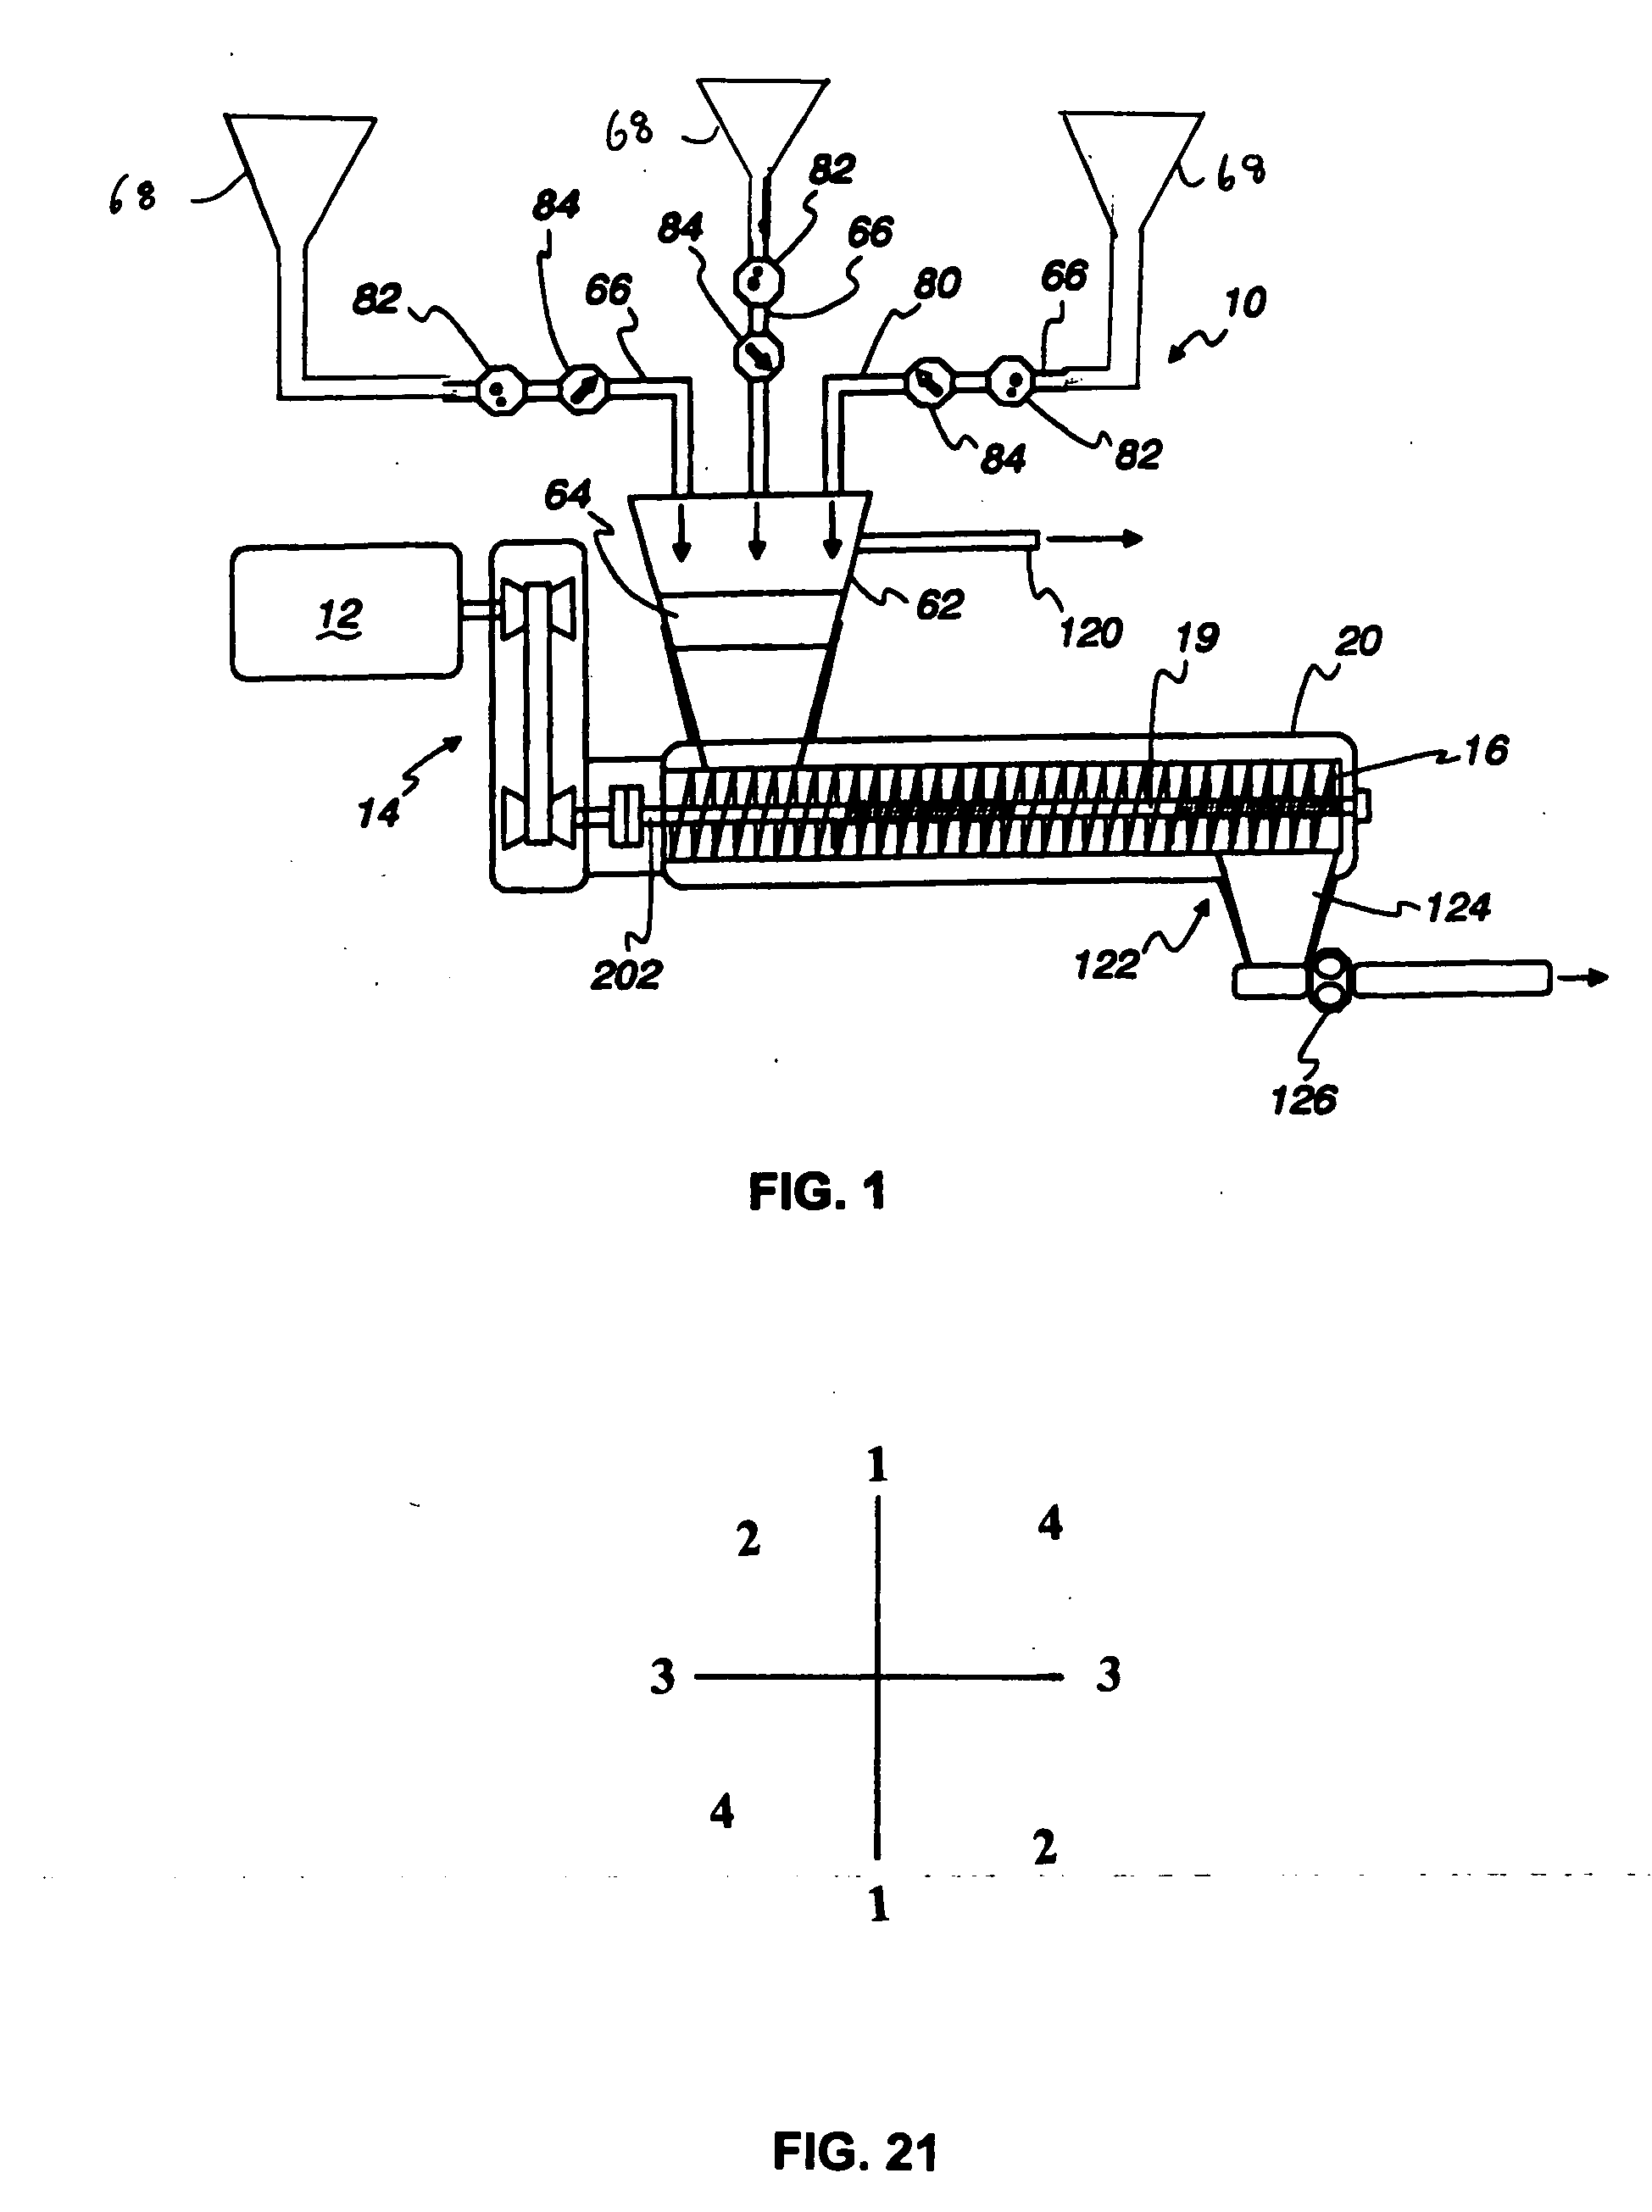 Method and apparatus for vacuum-less meat processing